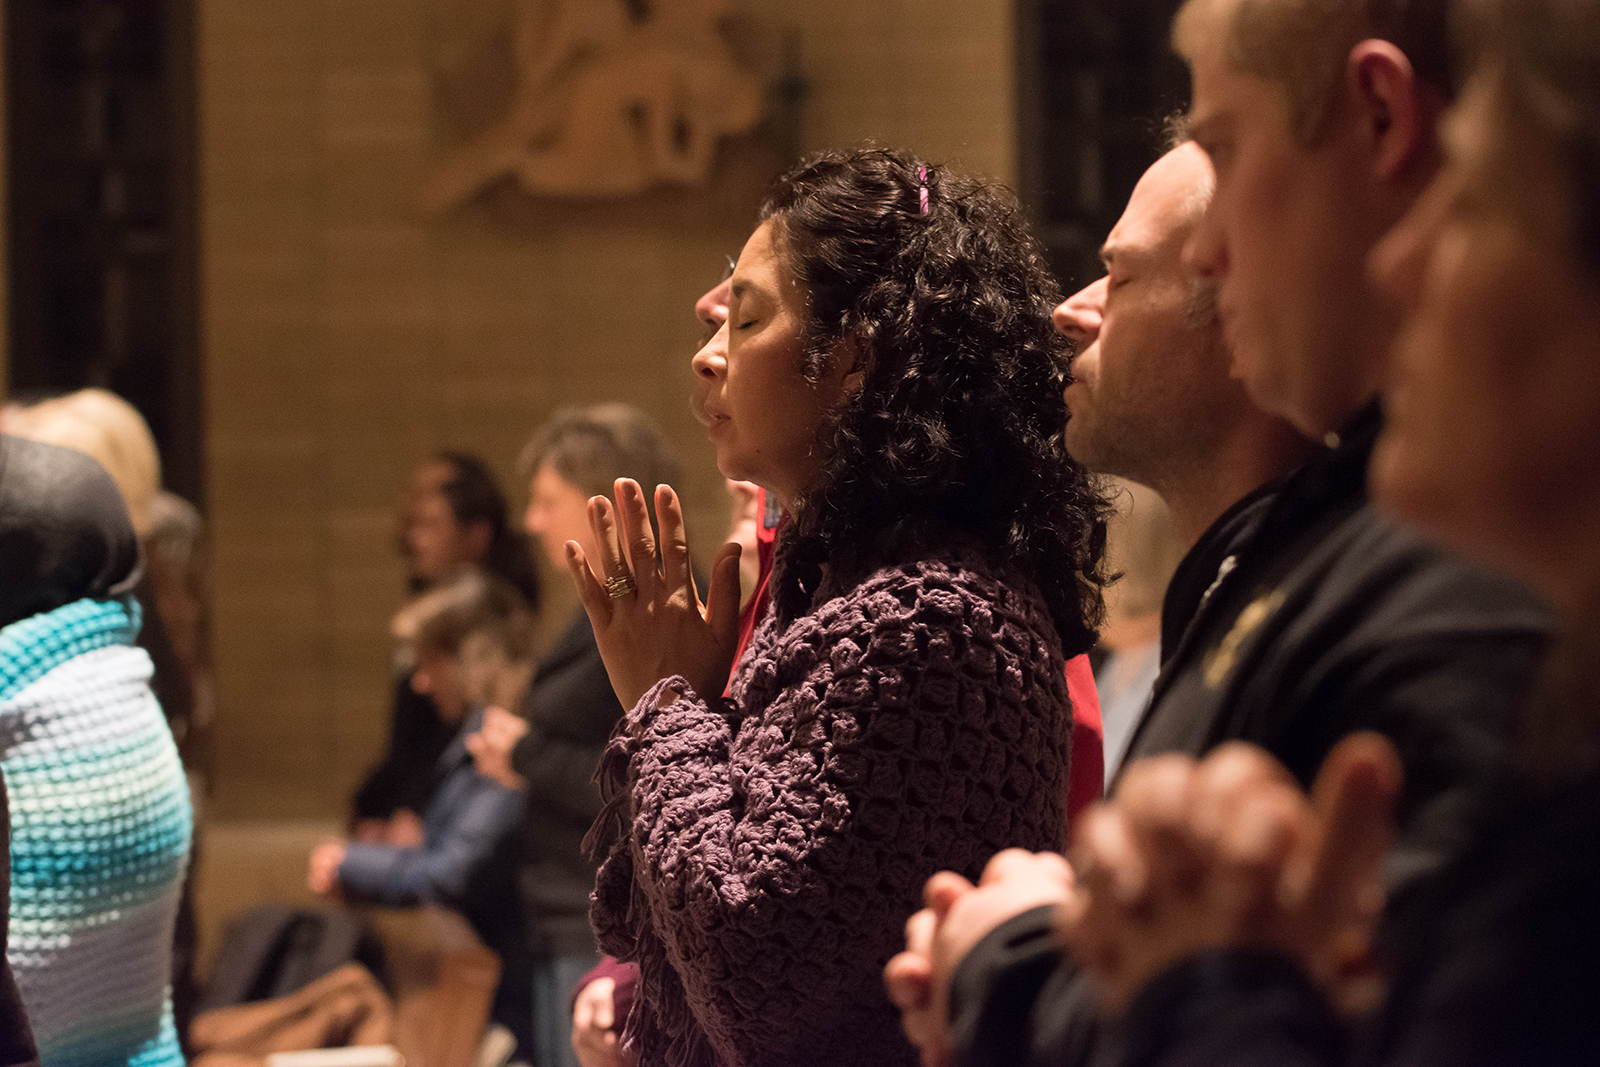 Woman praying with closed eyes in group at a church.